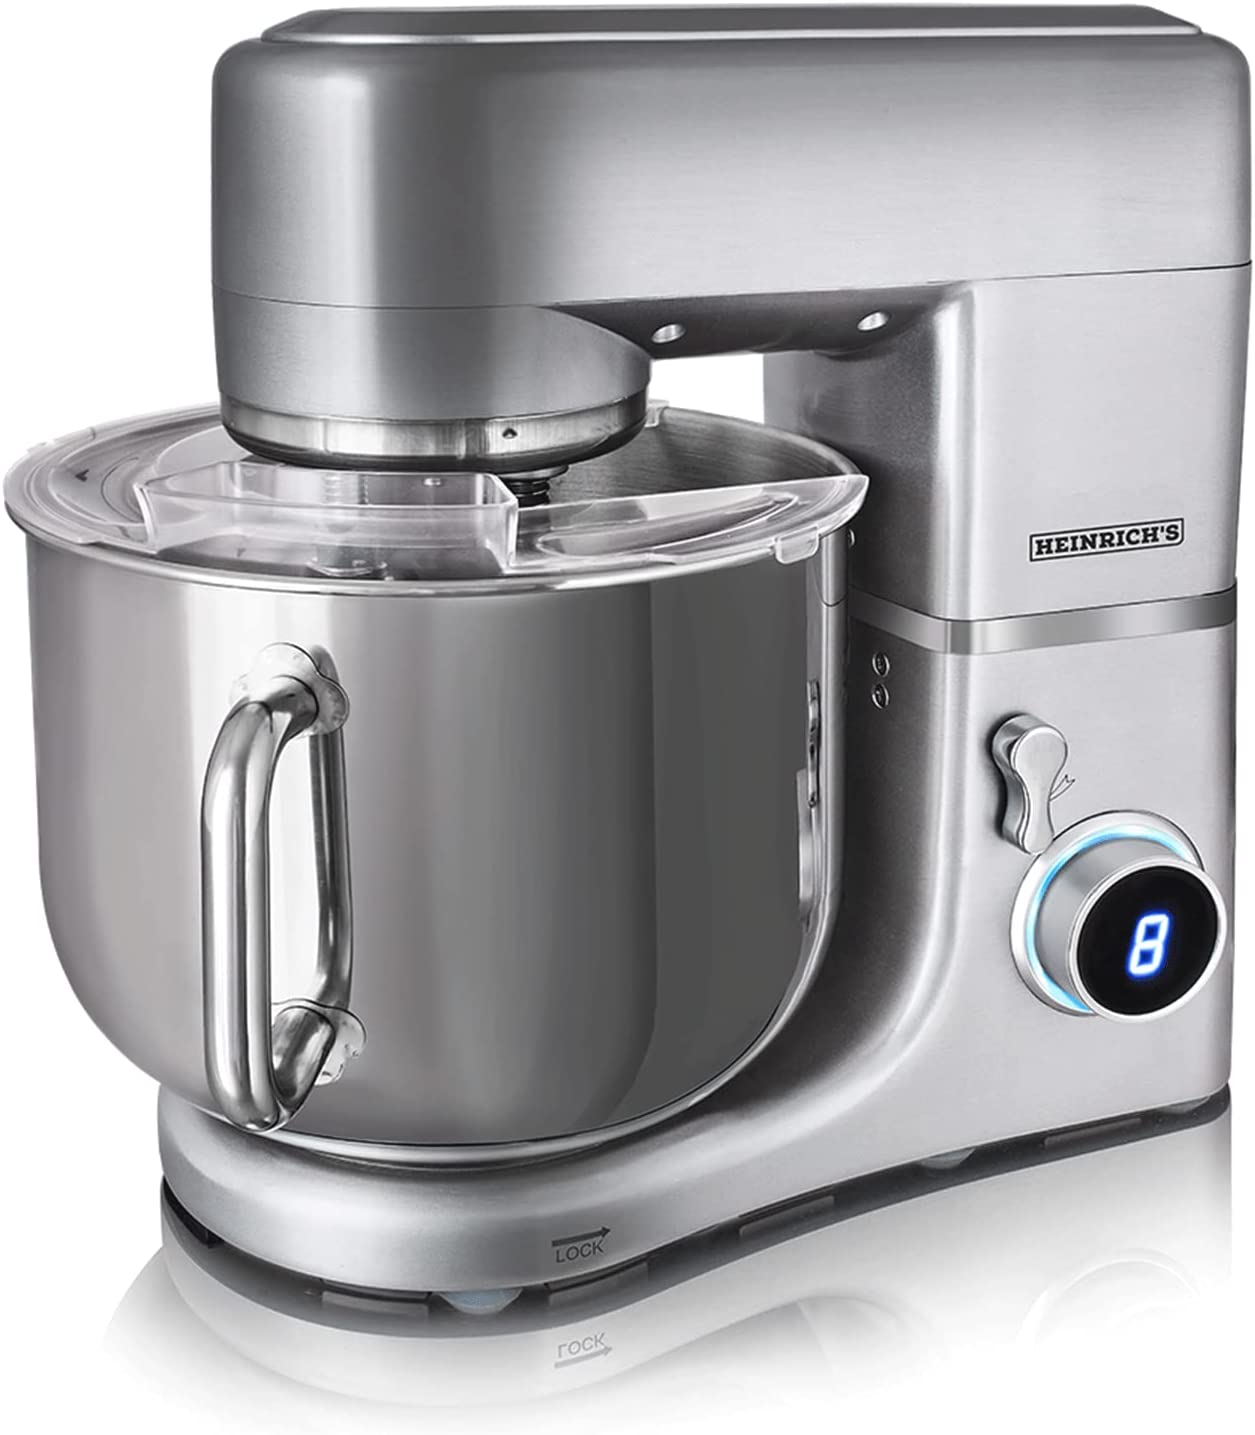 Heinrich´s Heinrichs Food Processor Kneading Machine Stainless Steel Bowl 1800 W Powerful Patented Dough Hook 8 Levels LCD Display Multifunctional Dough Kneading Machine (12 Litres)